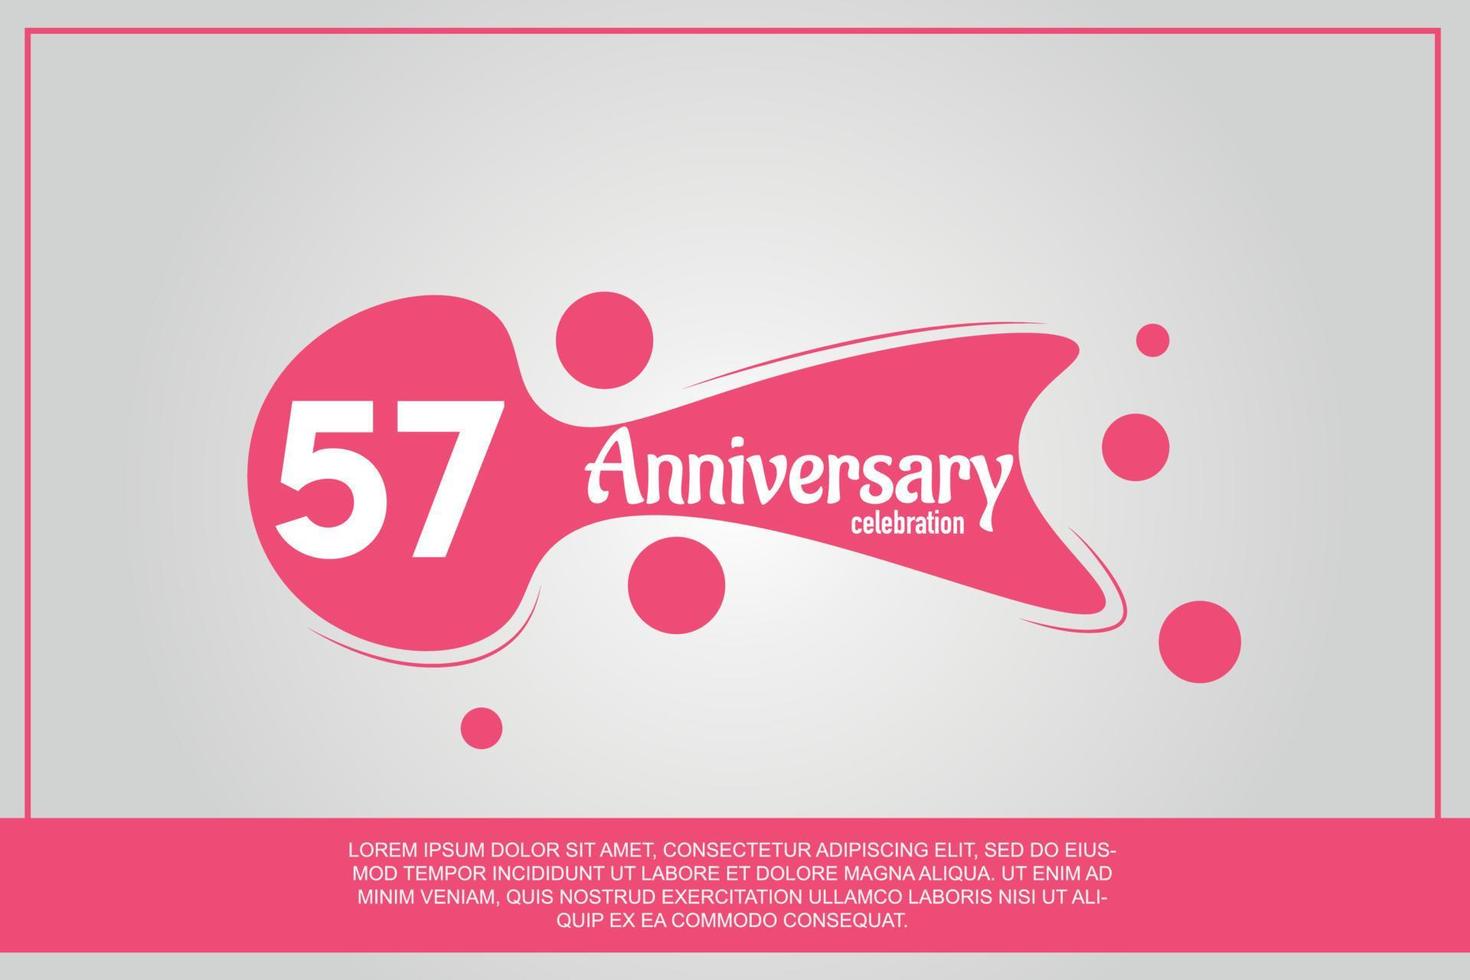 57 year anniversary celebration logo with pink color design with pink color bubbles on gray background vector abstract illustration